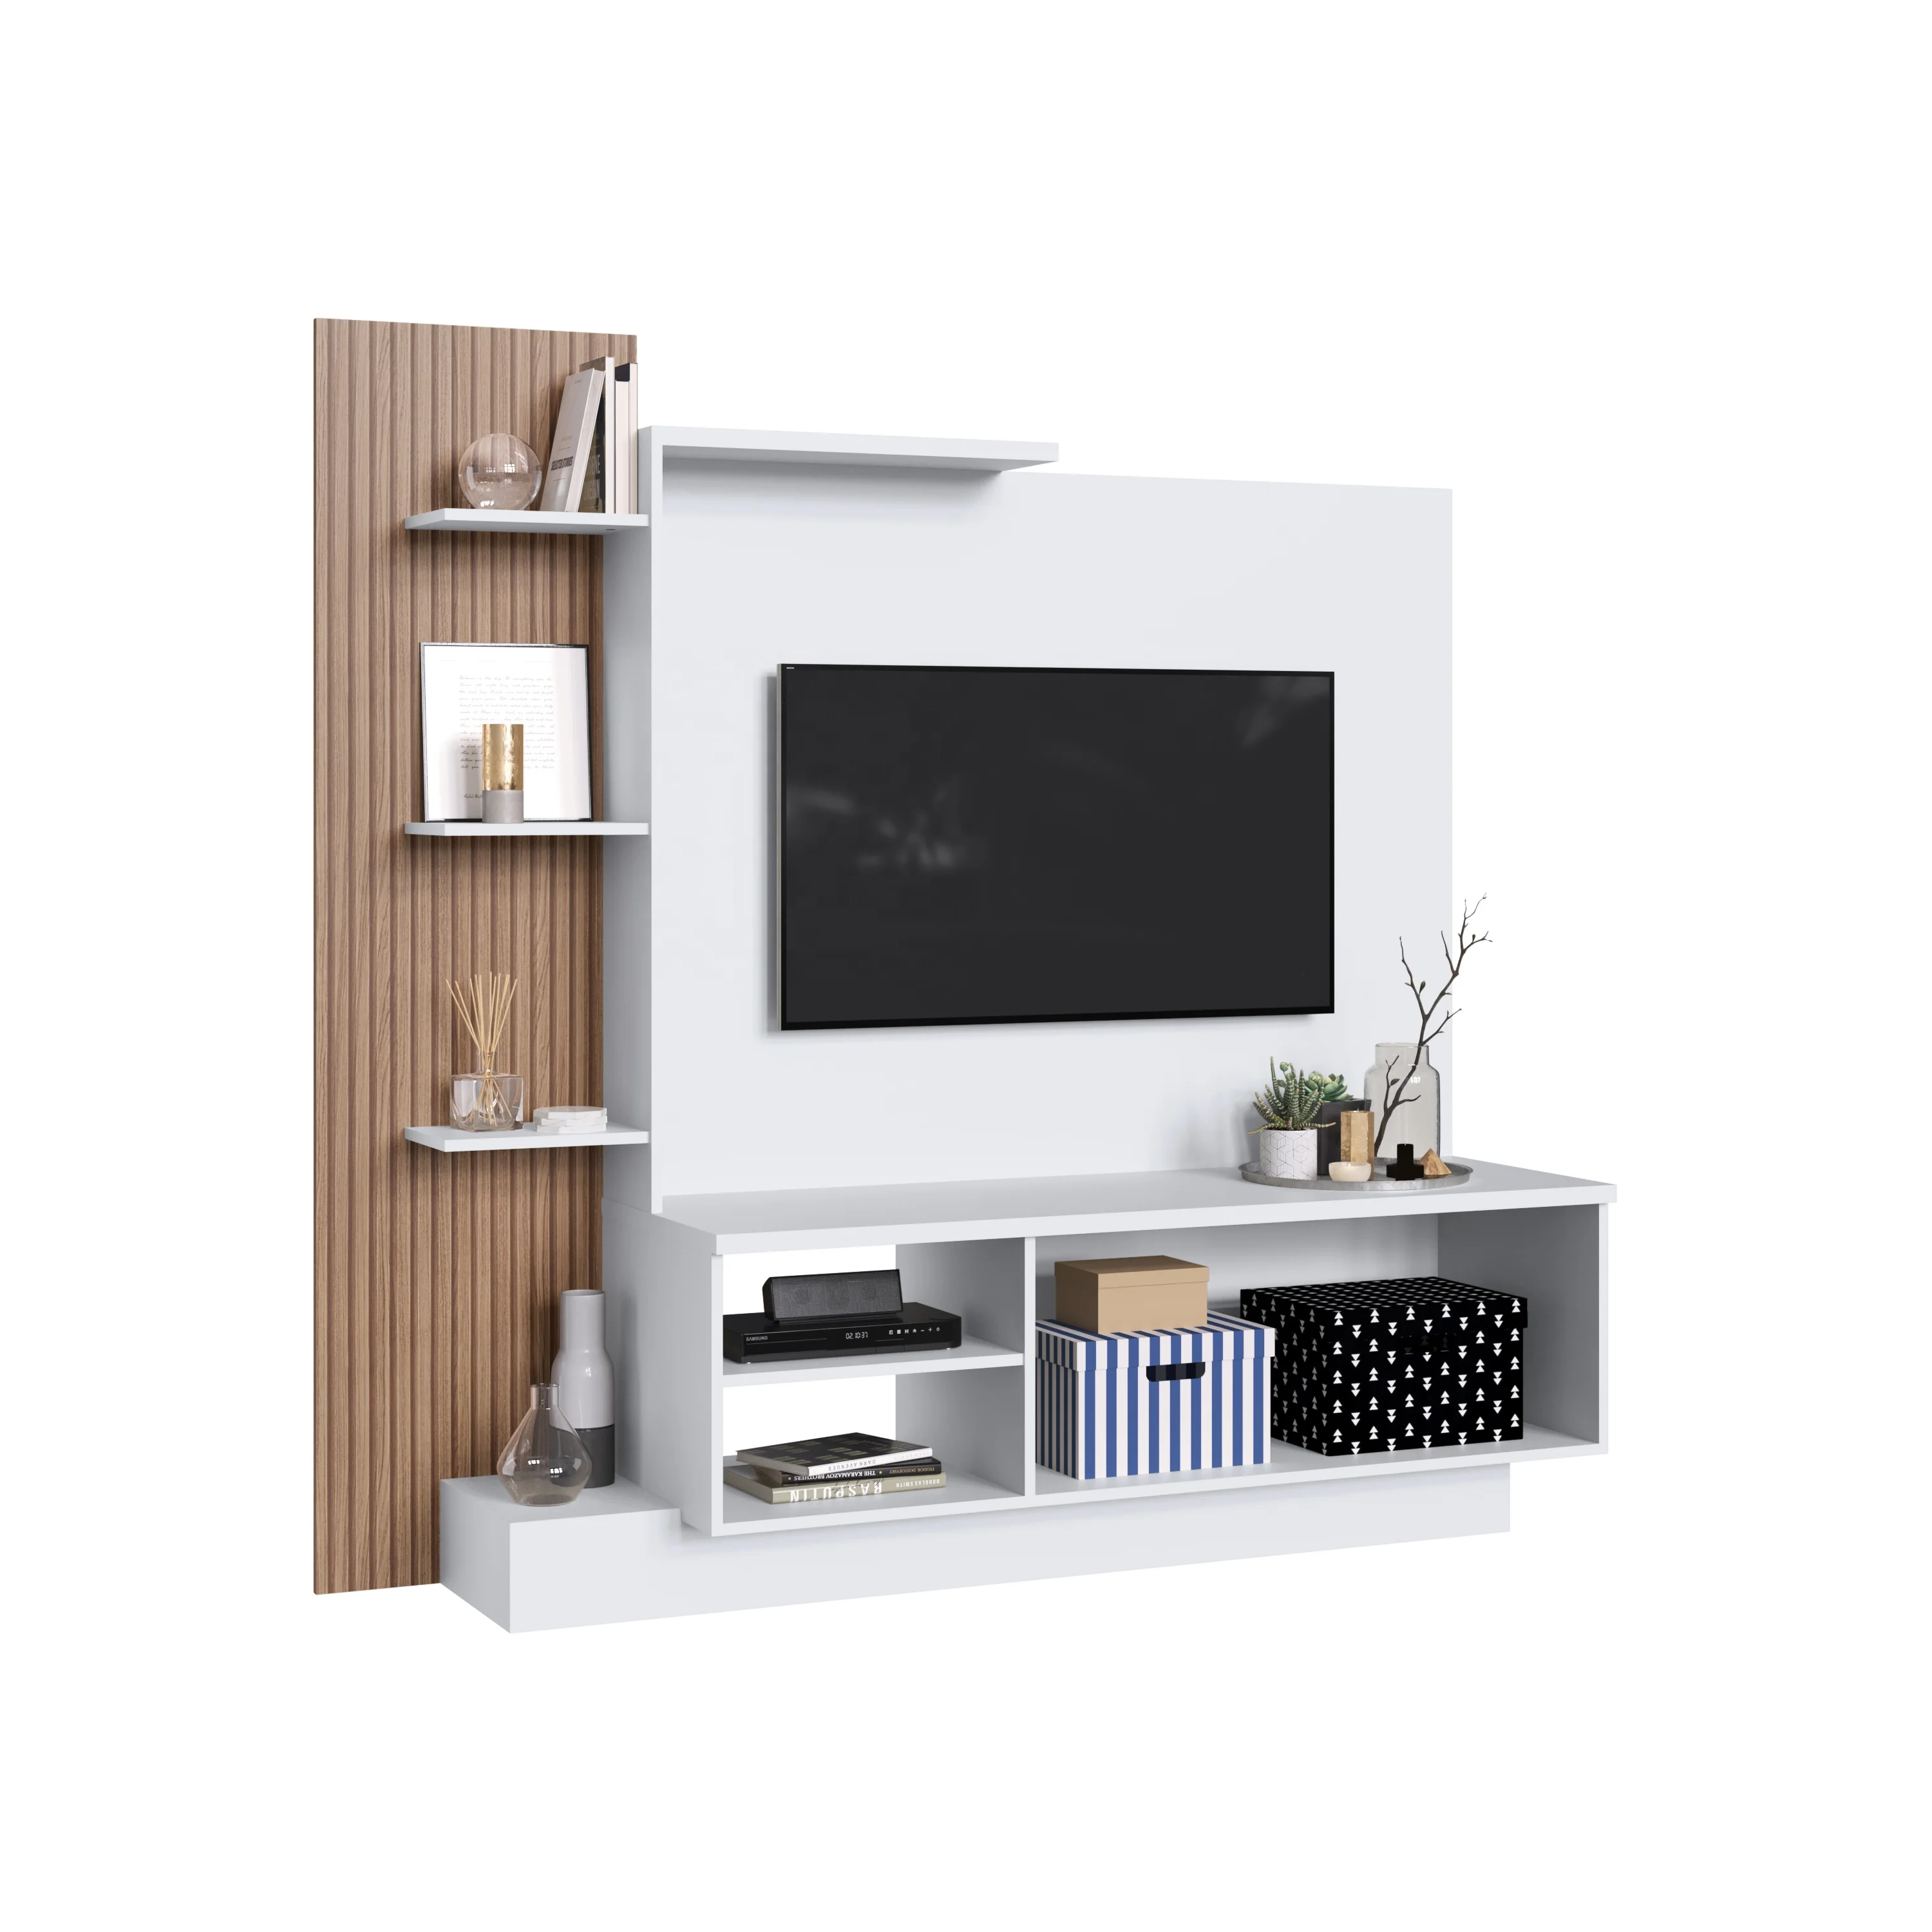 Modern Style Entertainment Center GABRIELA 2 doors Wooden Home Living Room Furniture Particleboard Milano/White Brazil Design